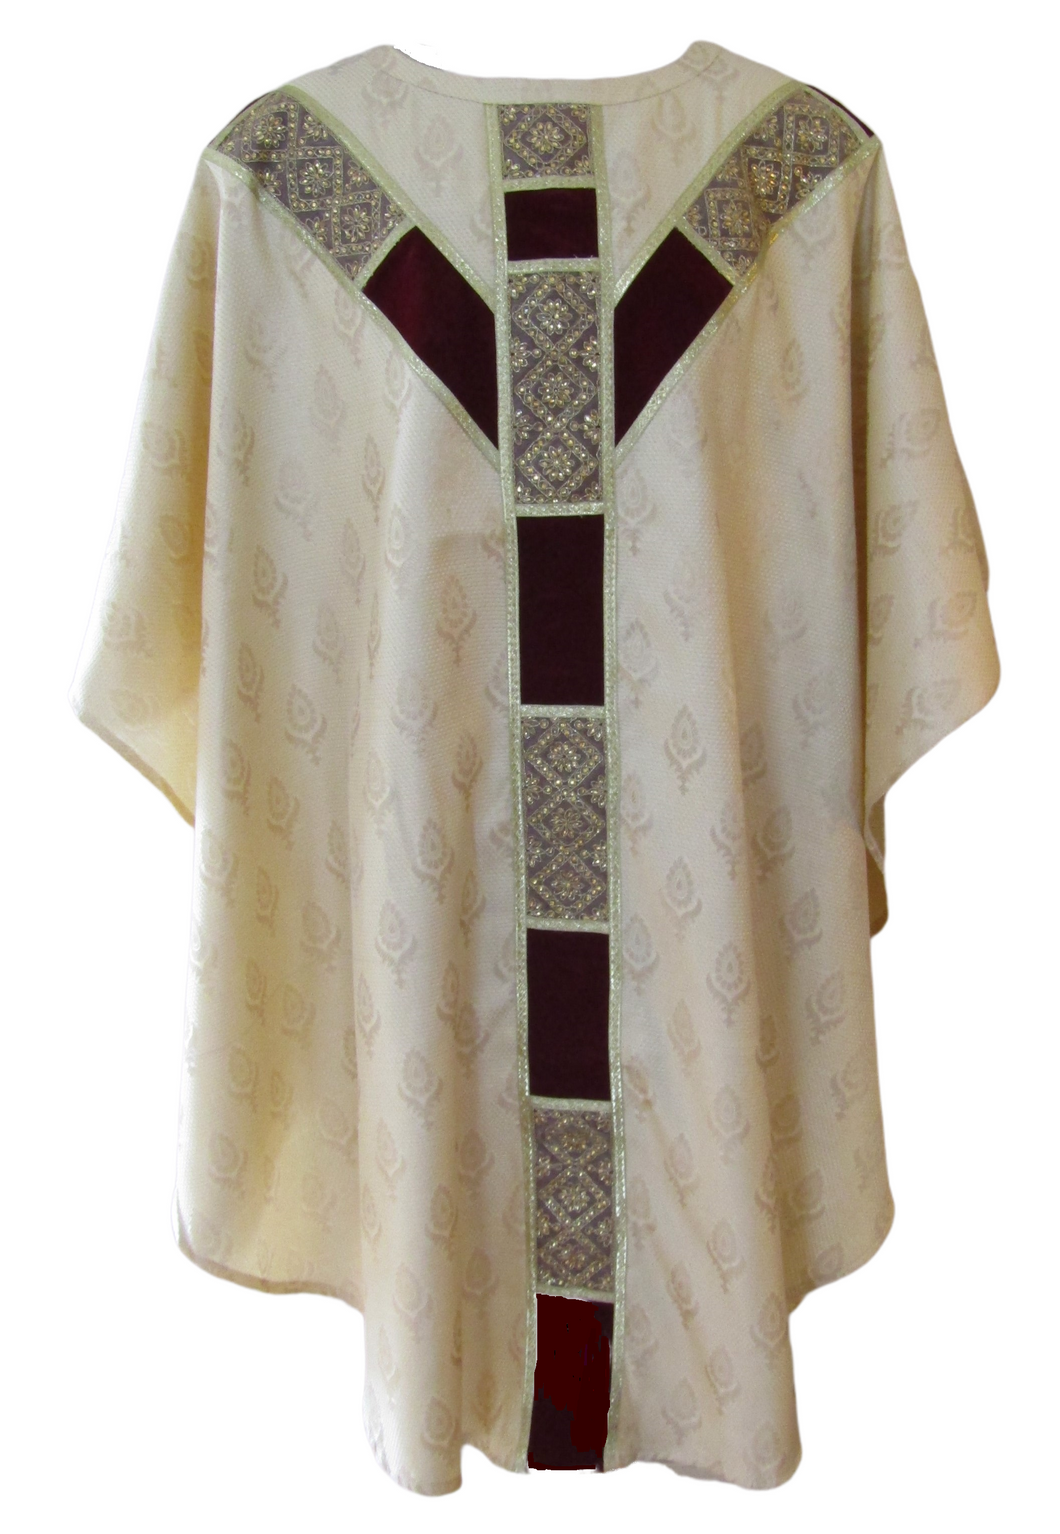 mds #21516 - The Light  Chasubles